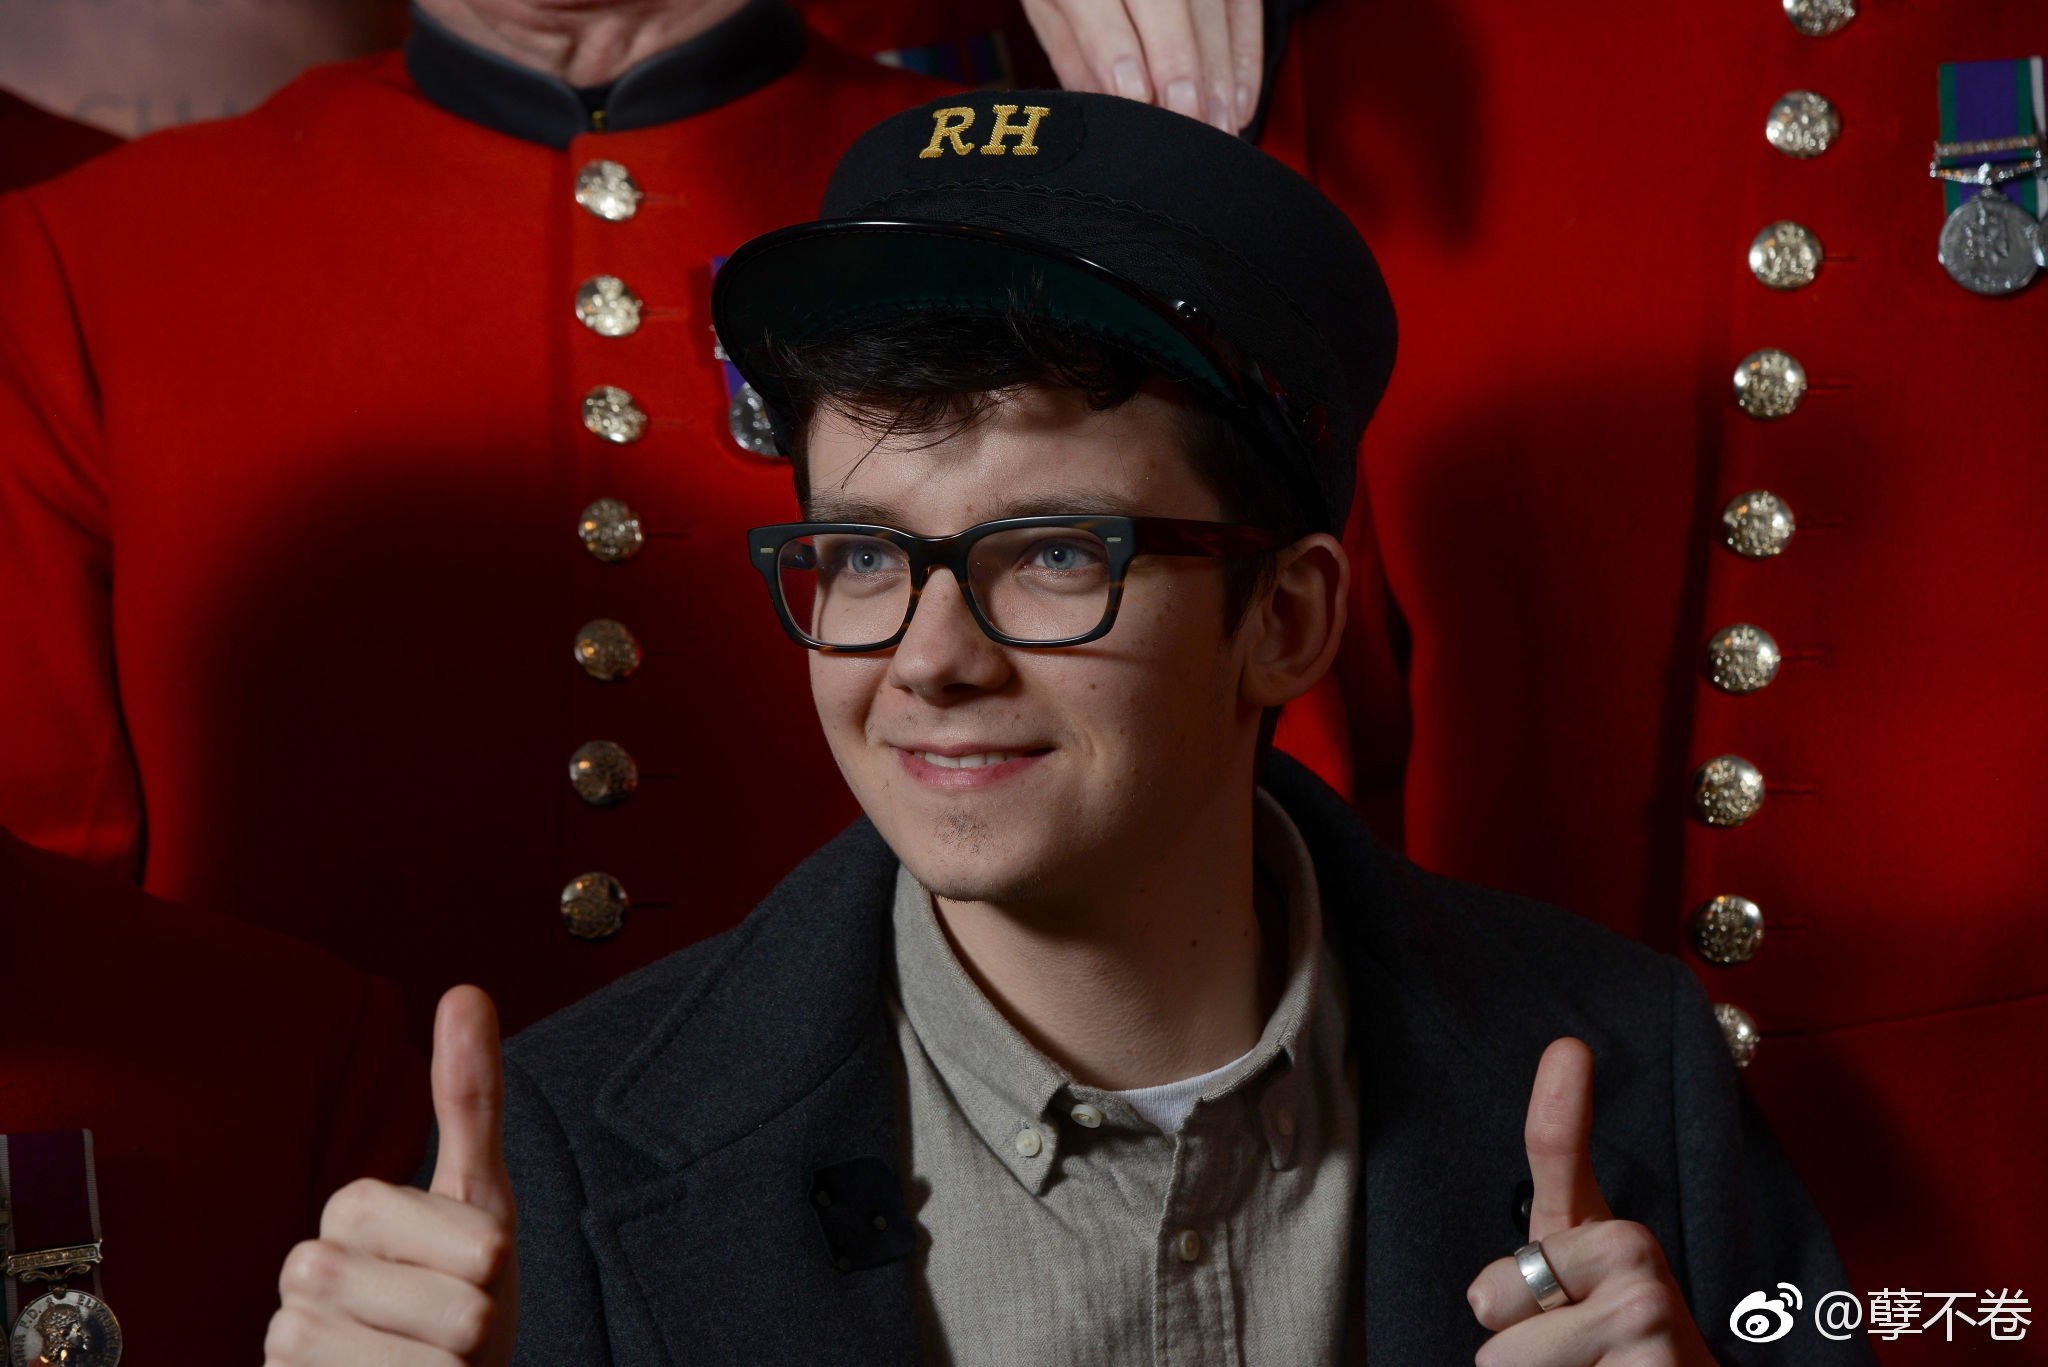 General photo of Asa Butterfield